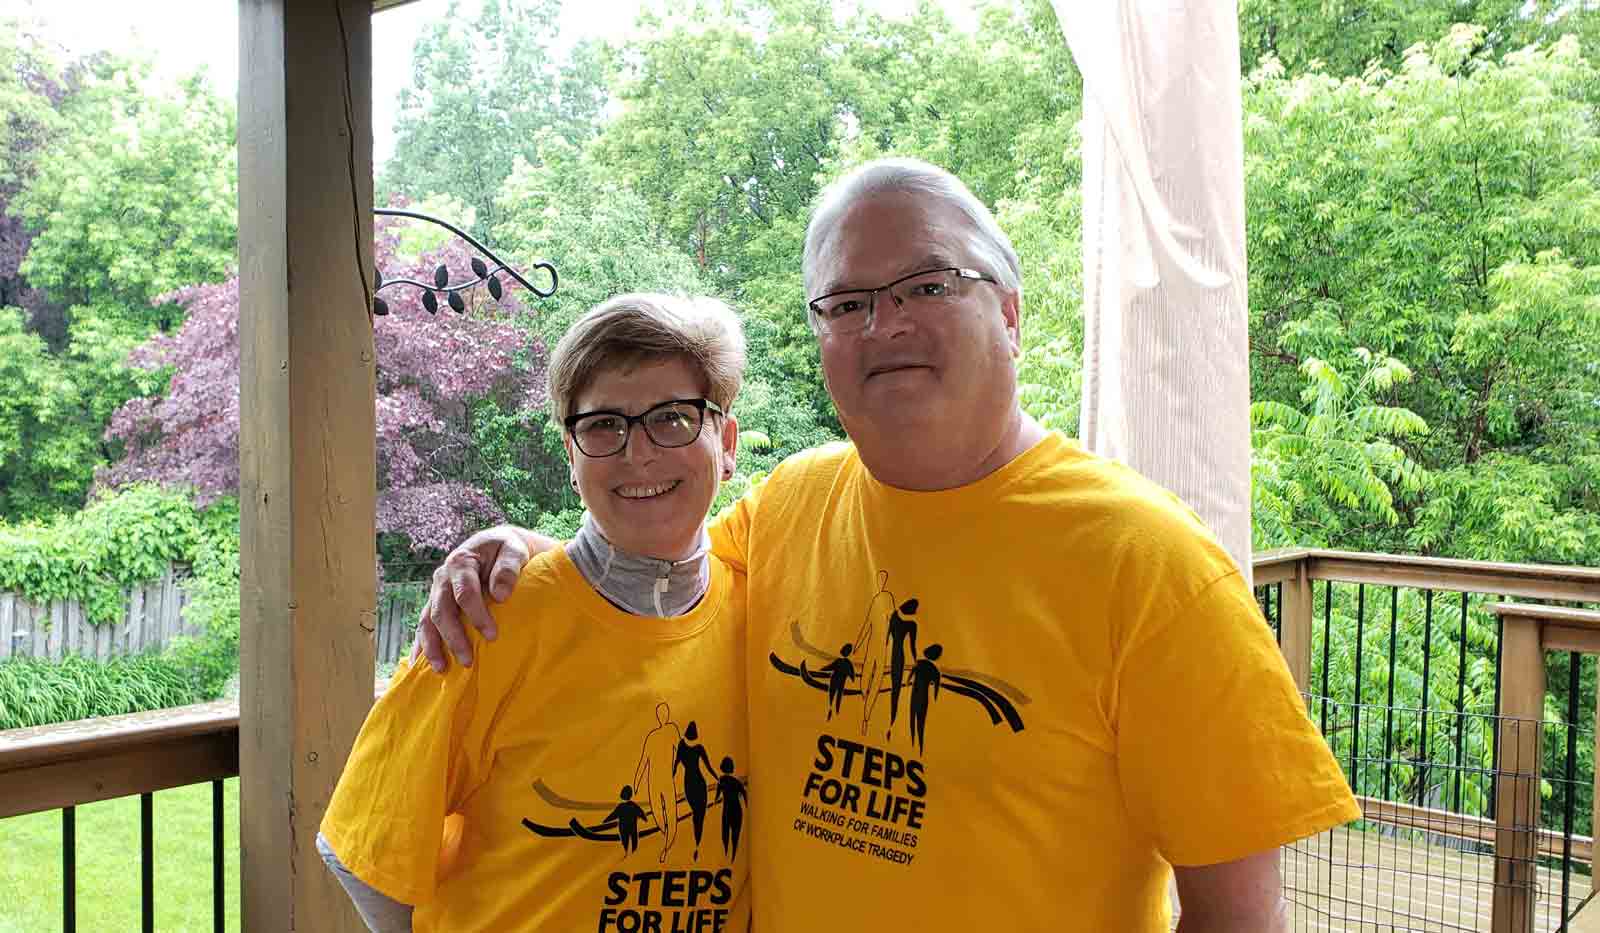 Marg and Scott pose in their yellow Steps for Life T-shirts. Lush greenery is seen behind them as they stand on the porch.